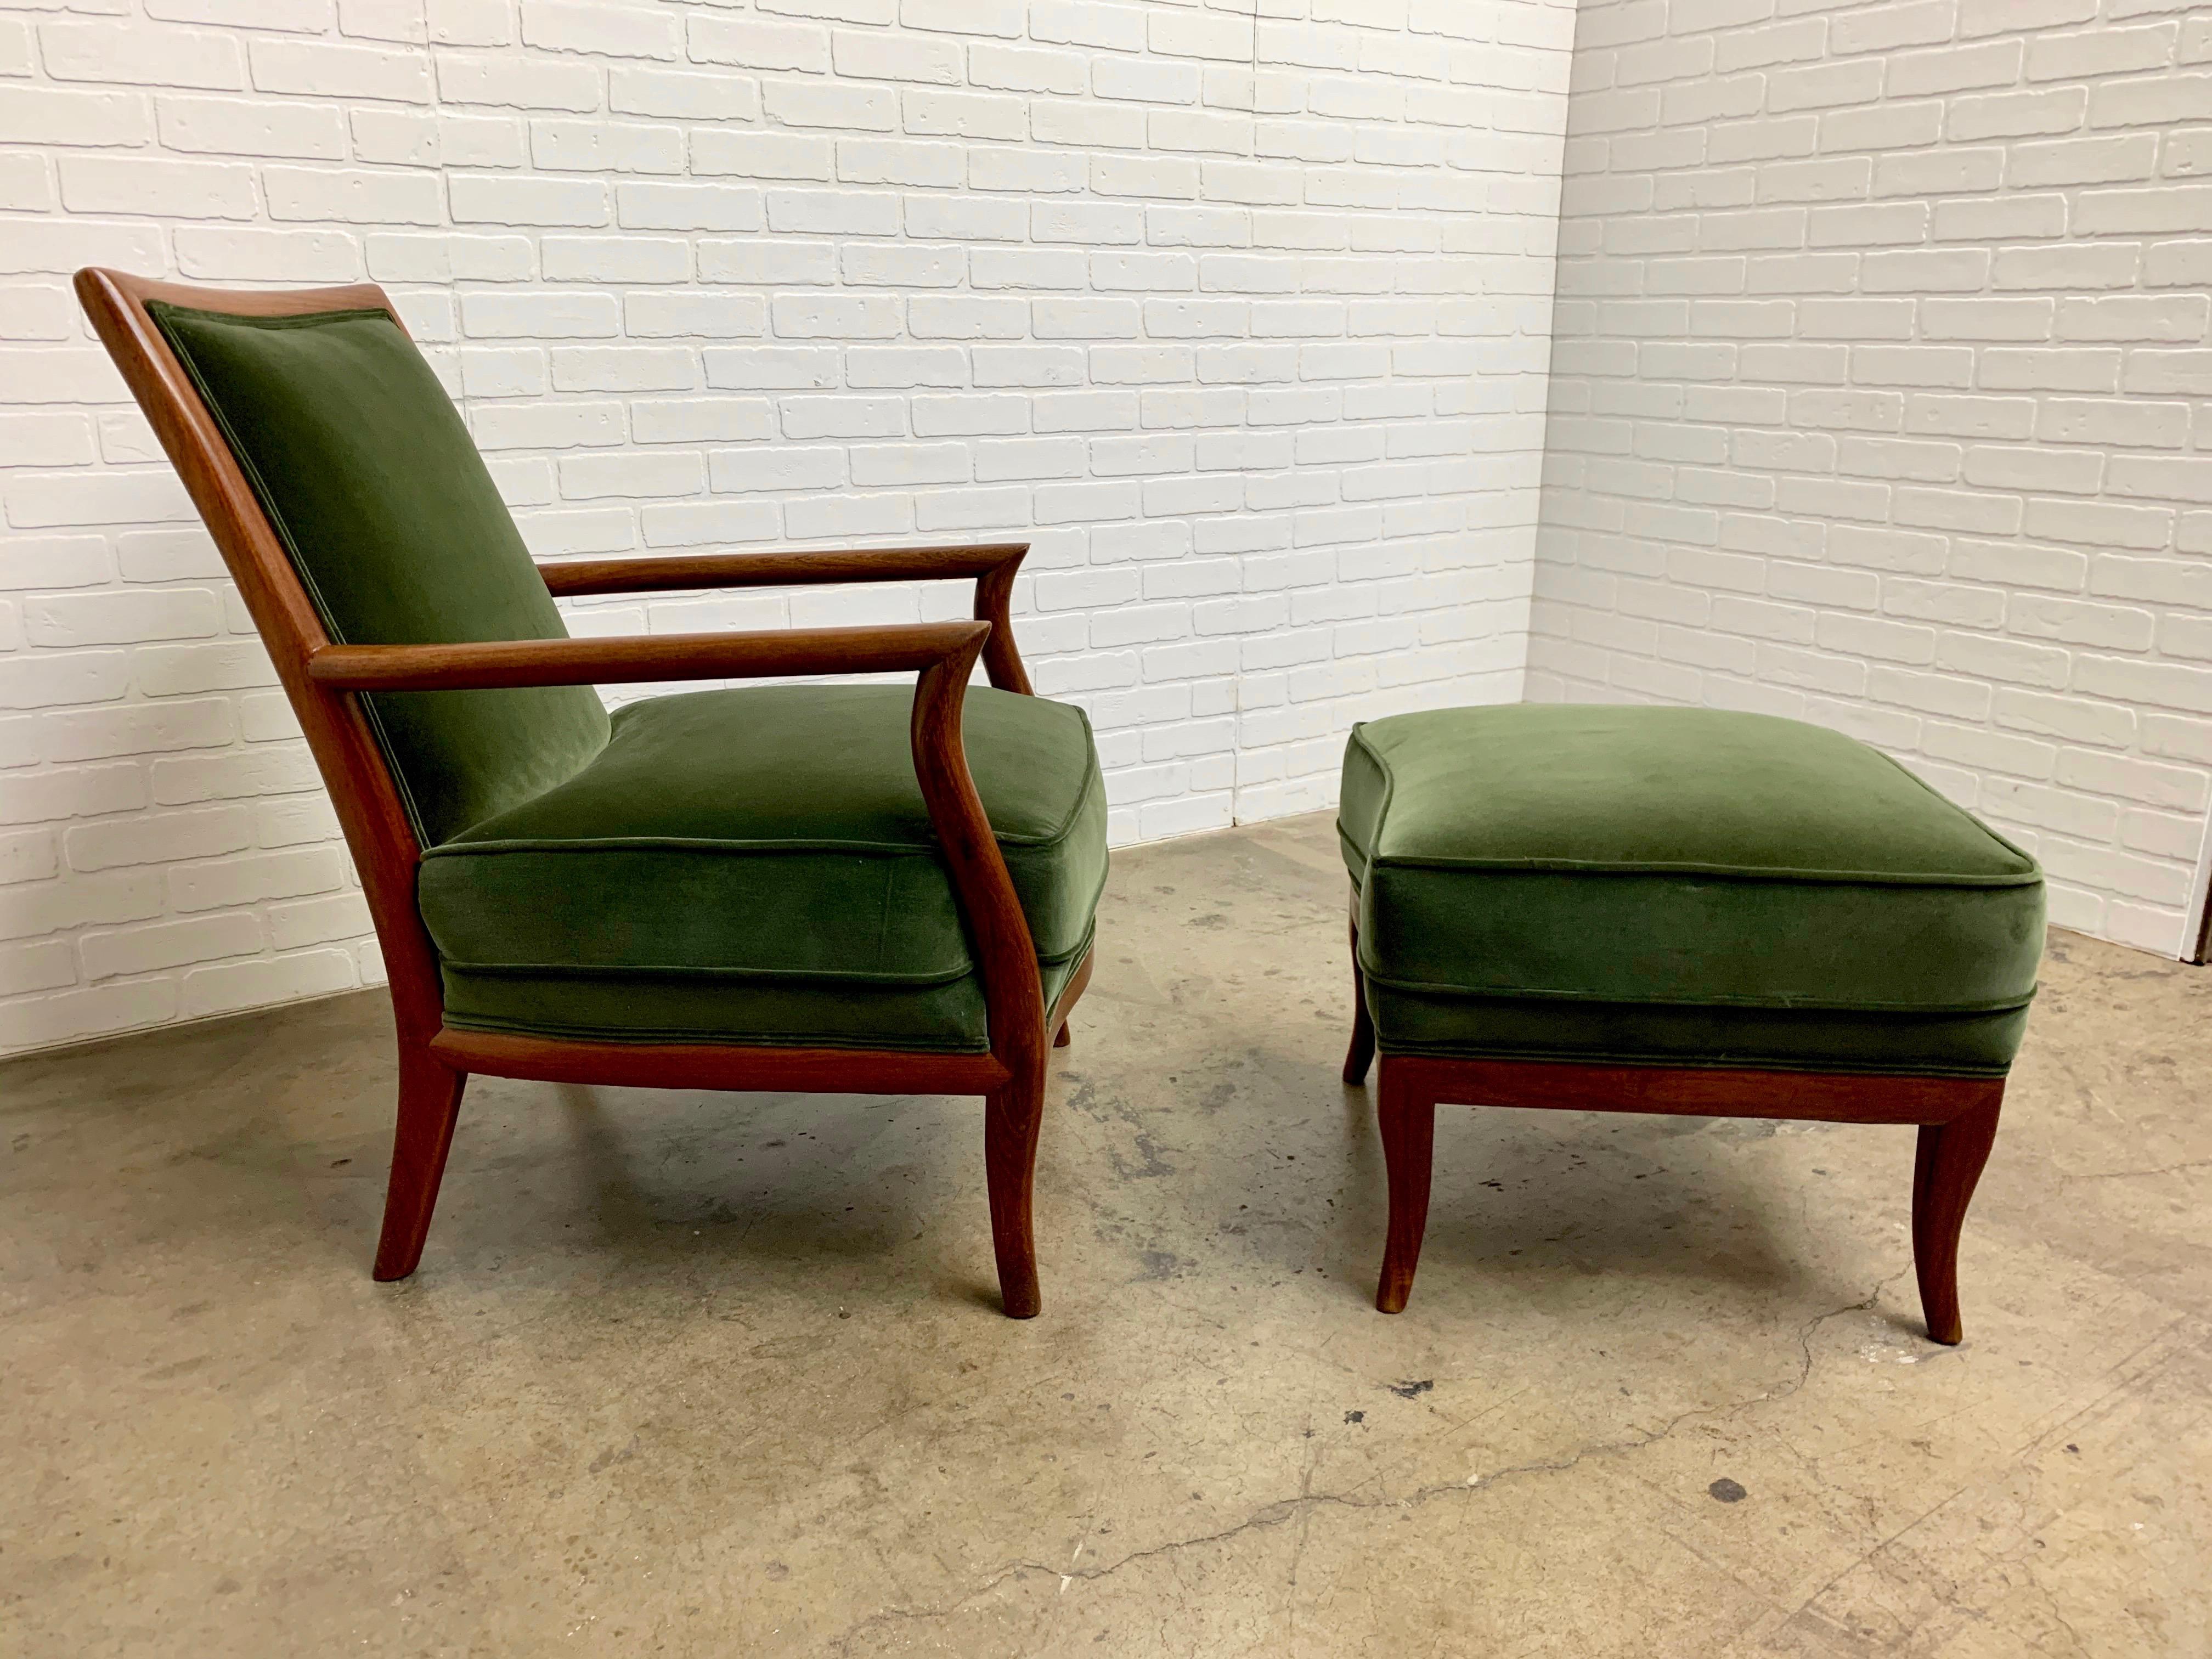 20th Century Sculpted Italian Style Lounge Chair and Ottoman